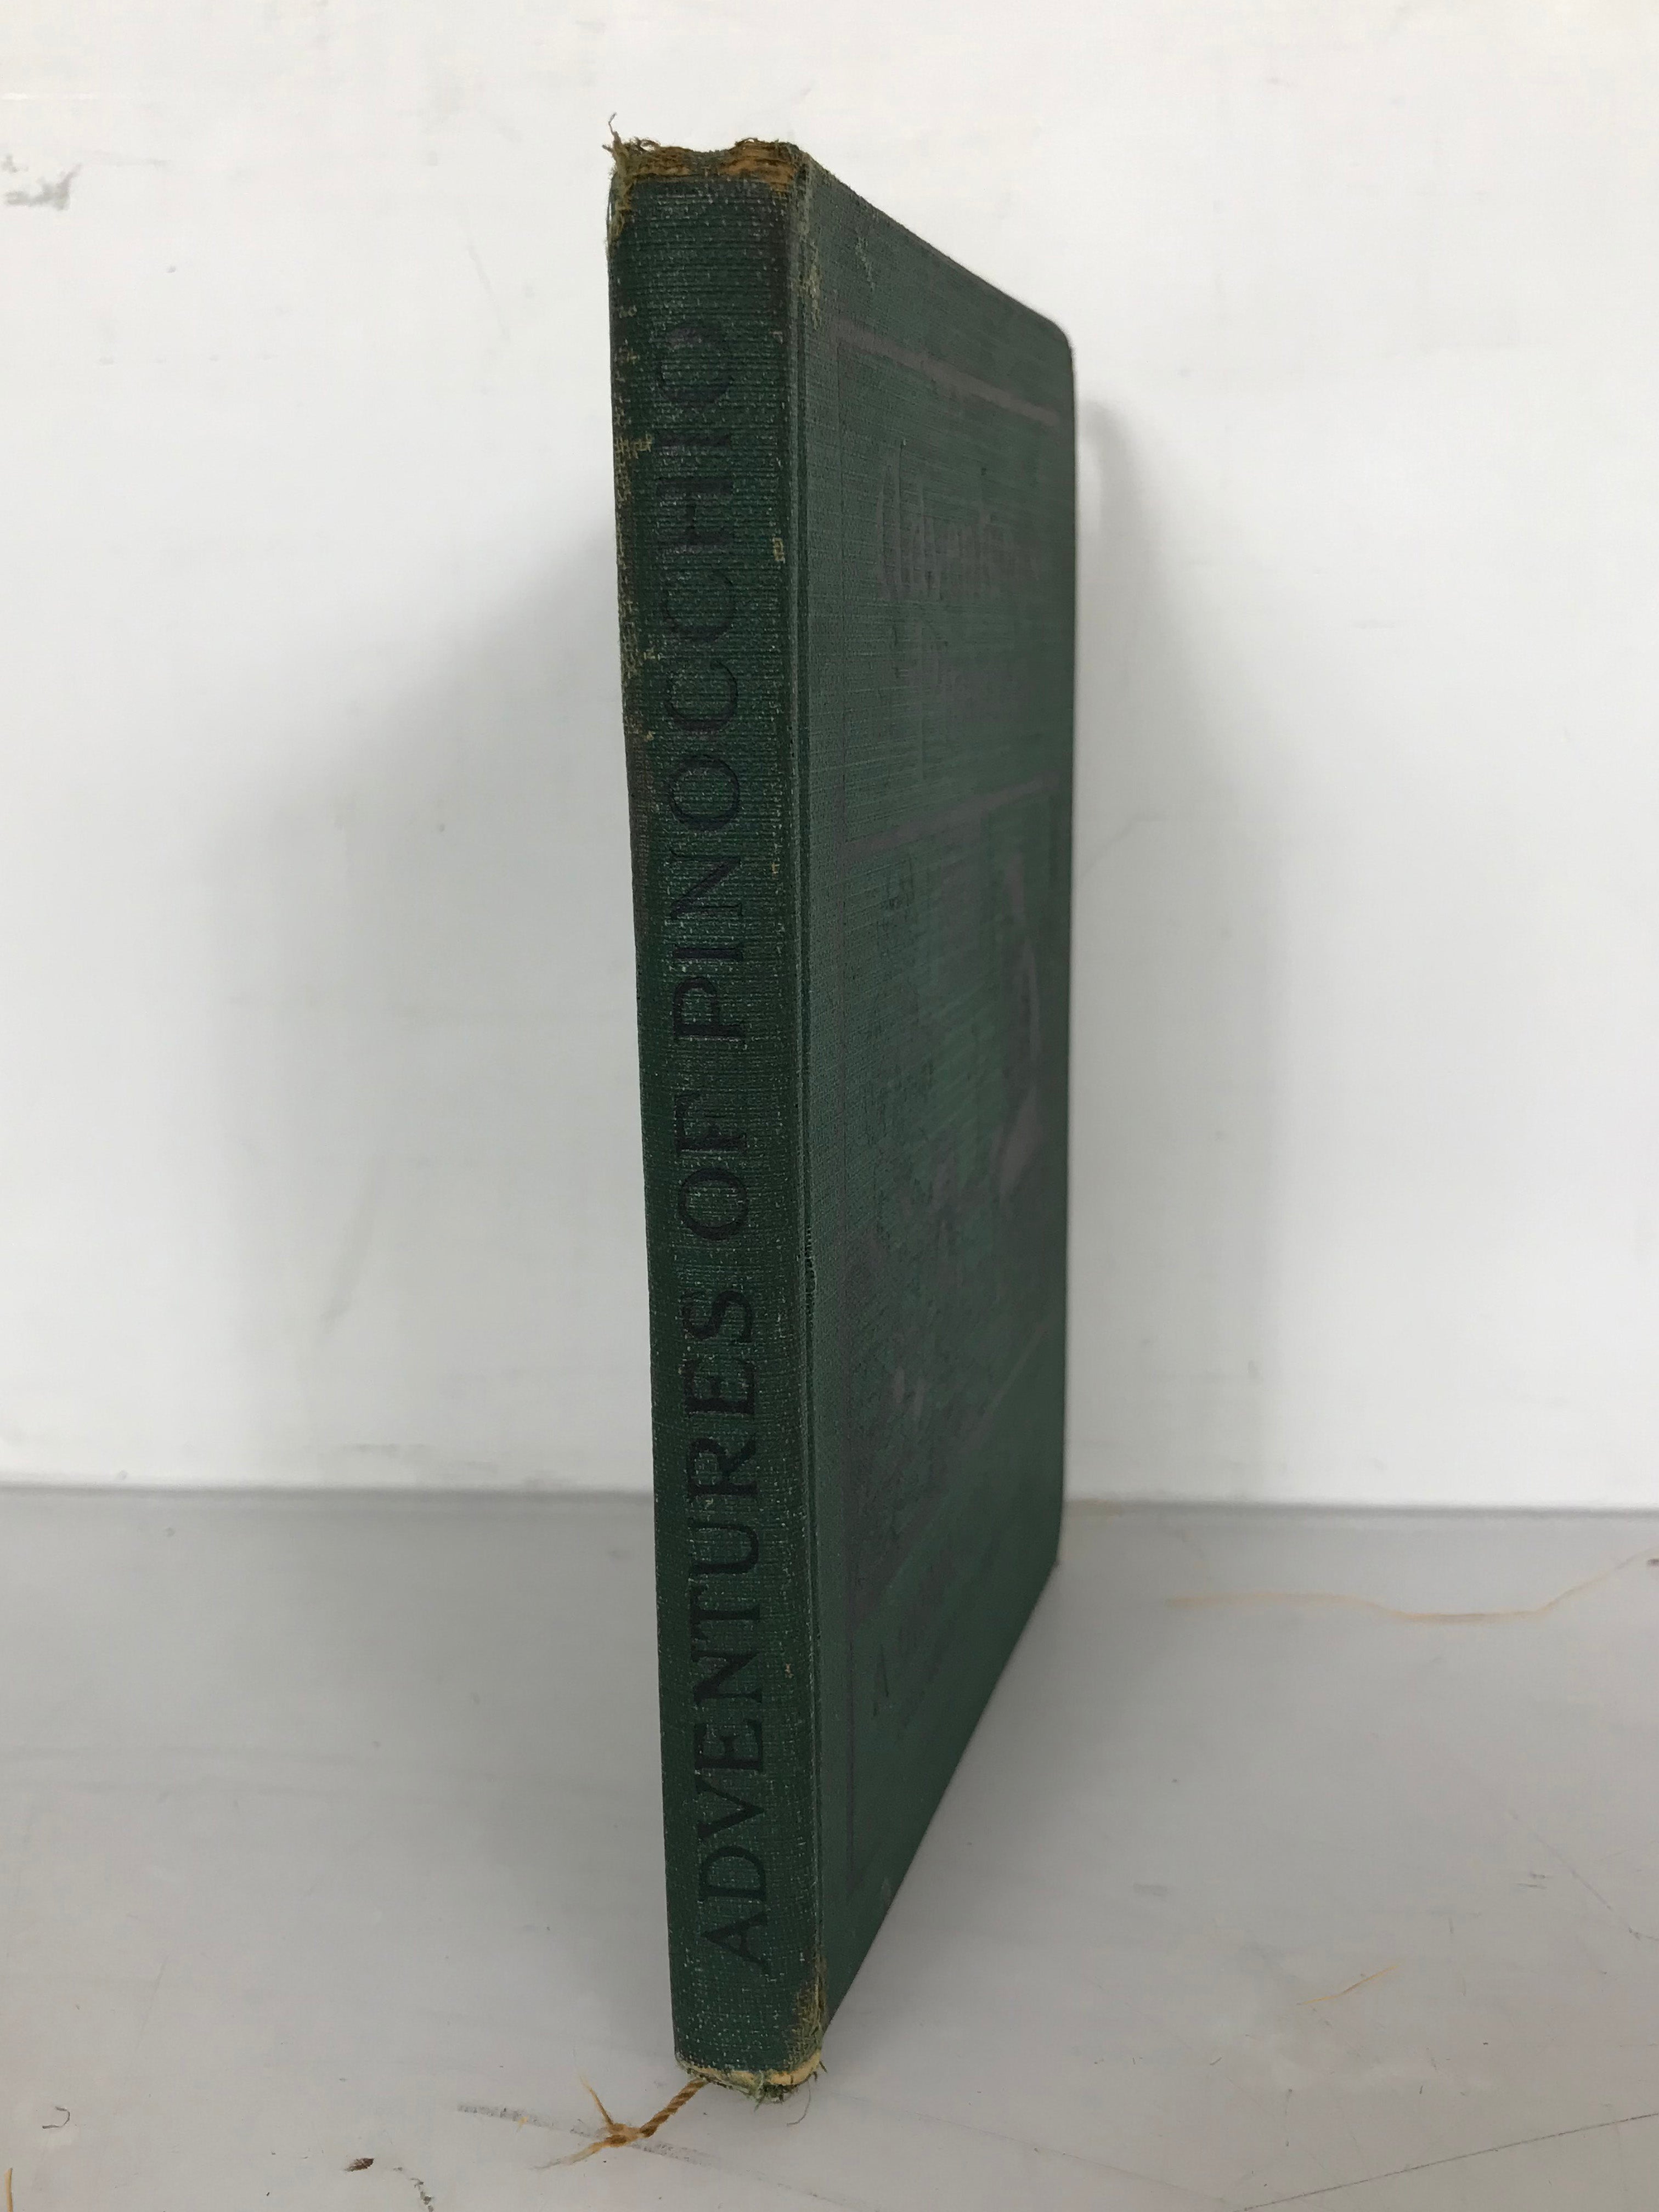 Adventures of Pinocchio a Marionette Dramatic Reader 1925 HC